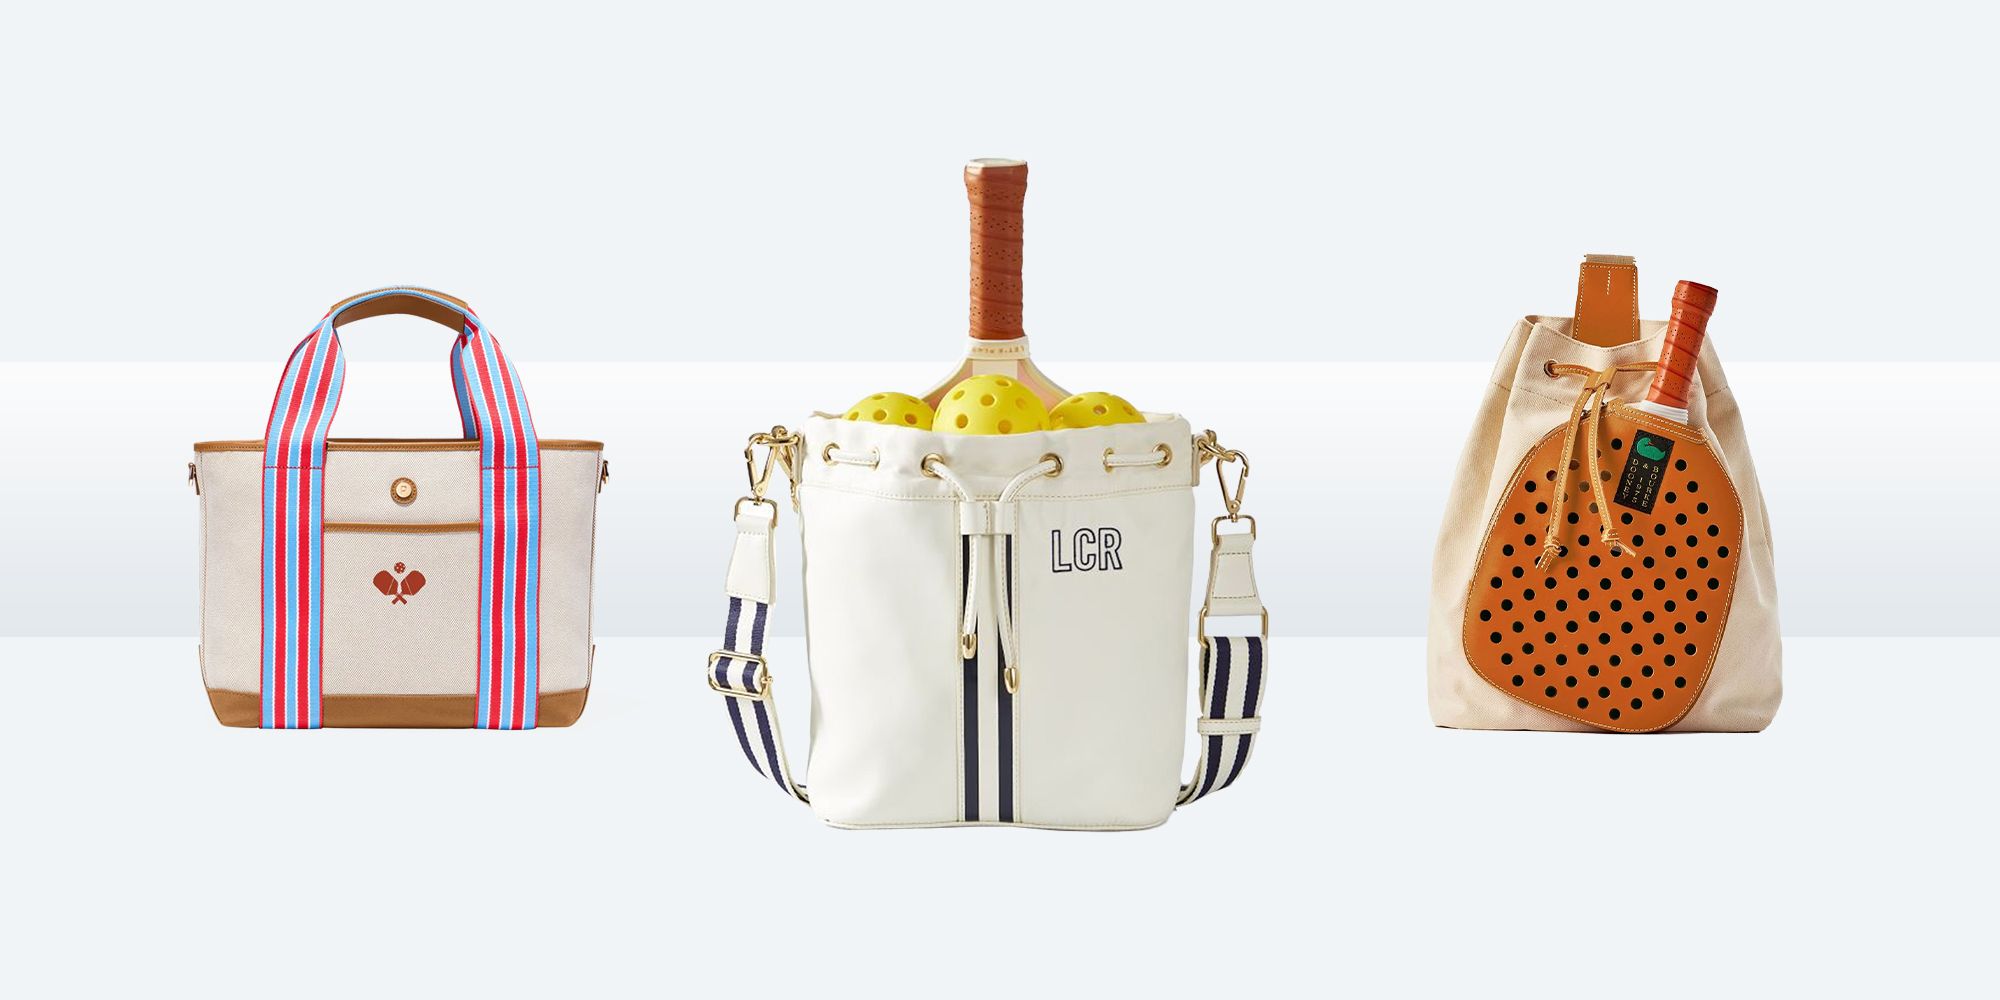 <p>Sure, the paddle is important. But a racquet bag, like any other carryall, reflects our personal needs and style—and is vital to carry everything you need for a match.</p><p>With a plenty of options to choose from, it can be hard to know what qualities you really need in a bag. “It’s important to think about how long you are playing for,” says Chris Hayworth. Hayworth, fresh off his pickleball APP gold medal and PPA silver medal wins, says, “Your bag has to be big enough to carry anything you will need in that time! Sunscreen, towels, extra shirts, socks, and paddles.” </p><p>You have your <a href="https://www.townandcountrymag.com/style/fashion-trends/g44270436/best-pickleball-shoes/">shoes</a> and <a href="https://www.townandcountrymag.com/style/fashion-trends/g43480932/pickleball-outfits/">outfit</a>; now it's time to finish the look. Ahead, we have compiled a list of pickleball bags for every level of player. Whether you are a touring pro or just starting your pickleball journey, everyone deserves a bag that is fit to win! Here, the 20 best of the season.</p>